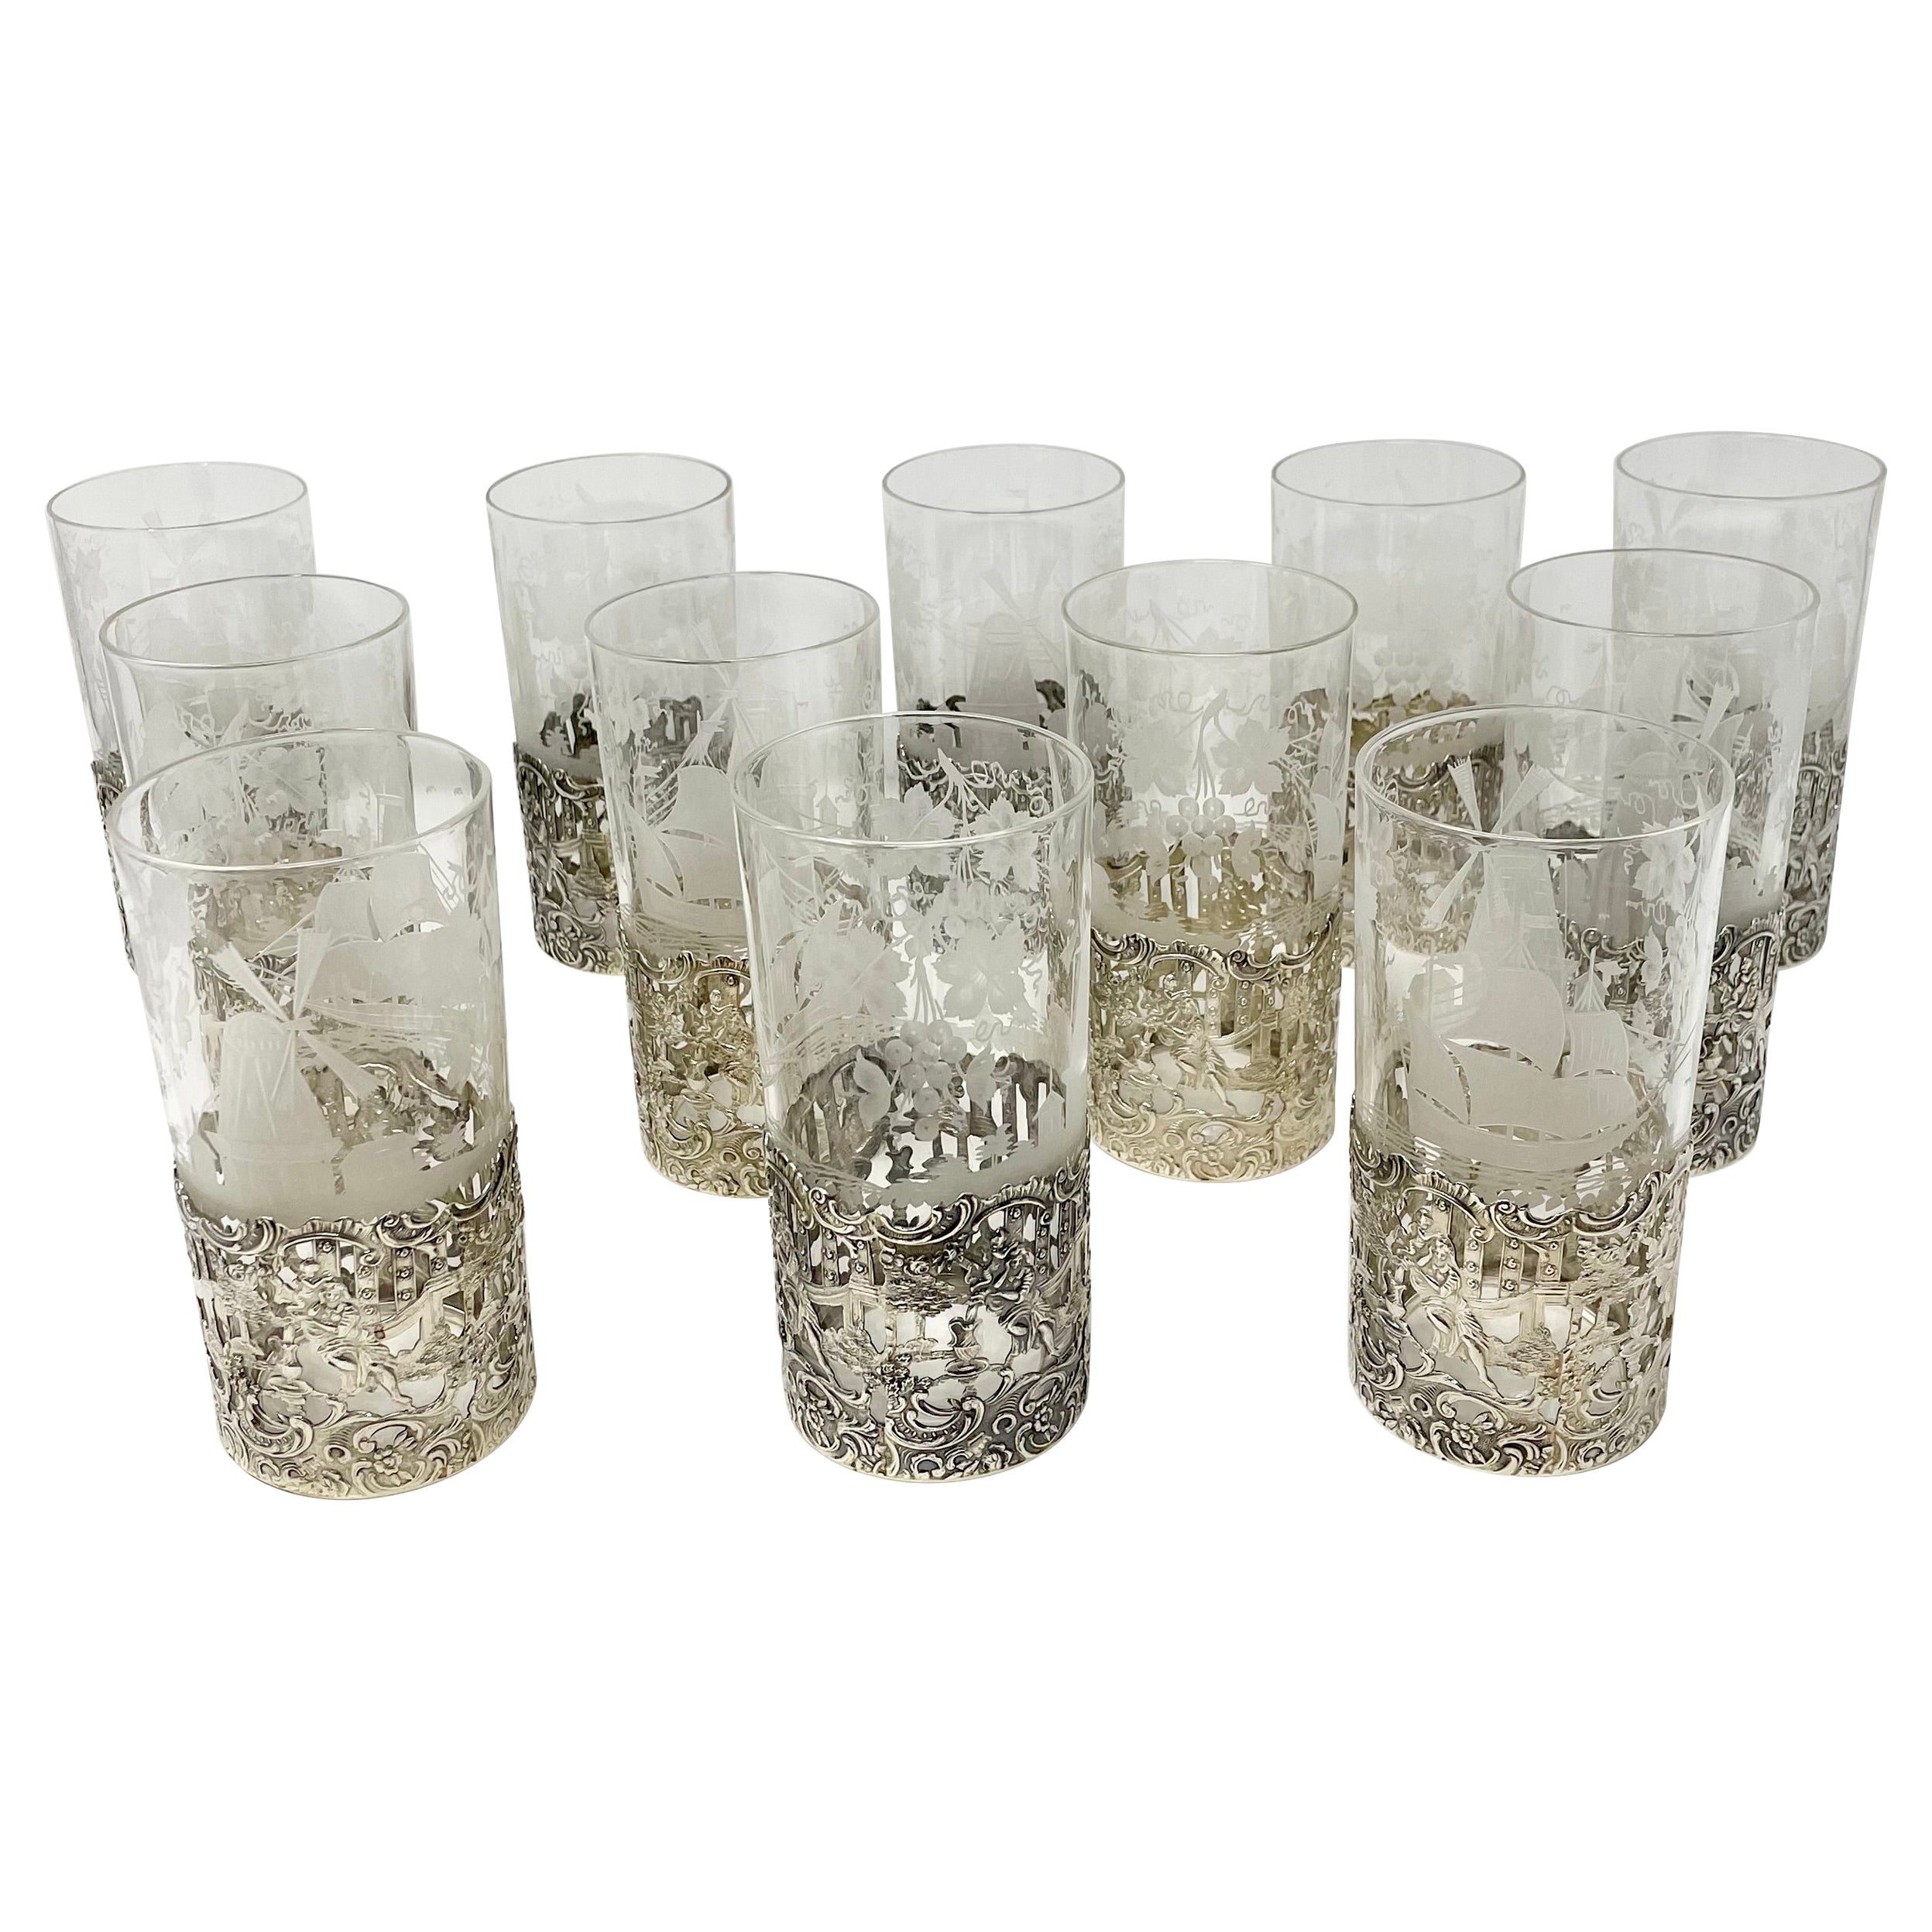 Set of 12 Antique American Sterling Silver Mounted and Hand-Etched Highball Glasses, Circa 1900's.